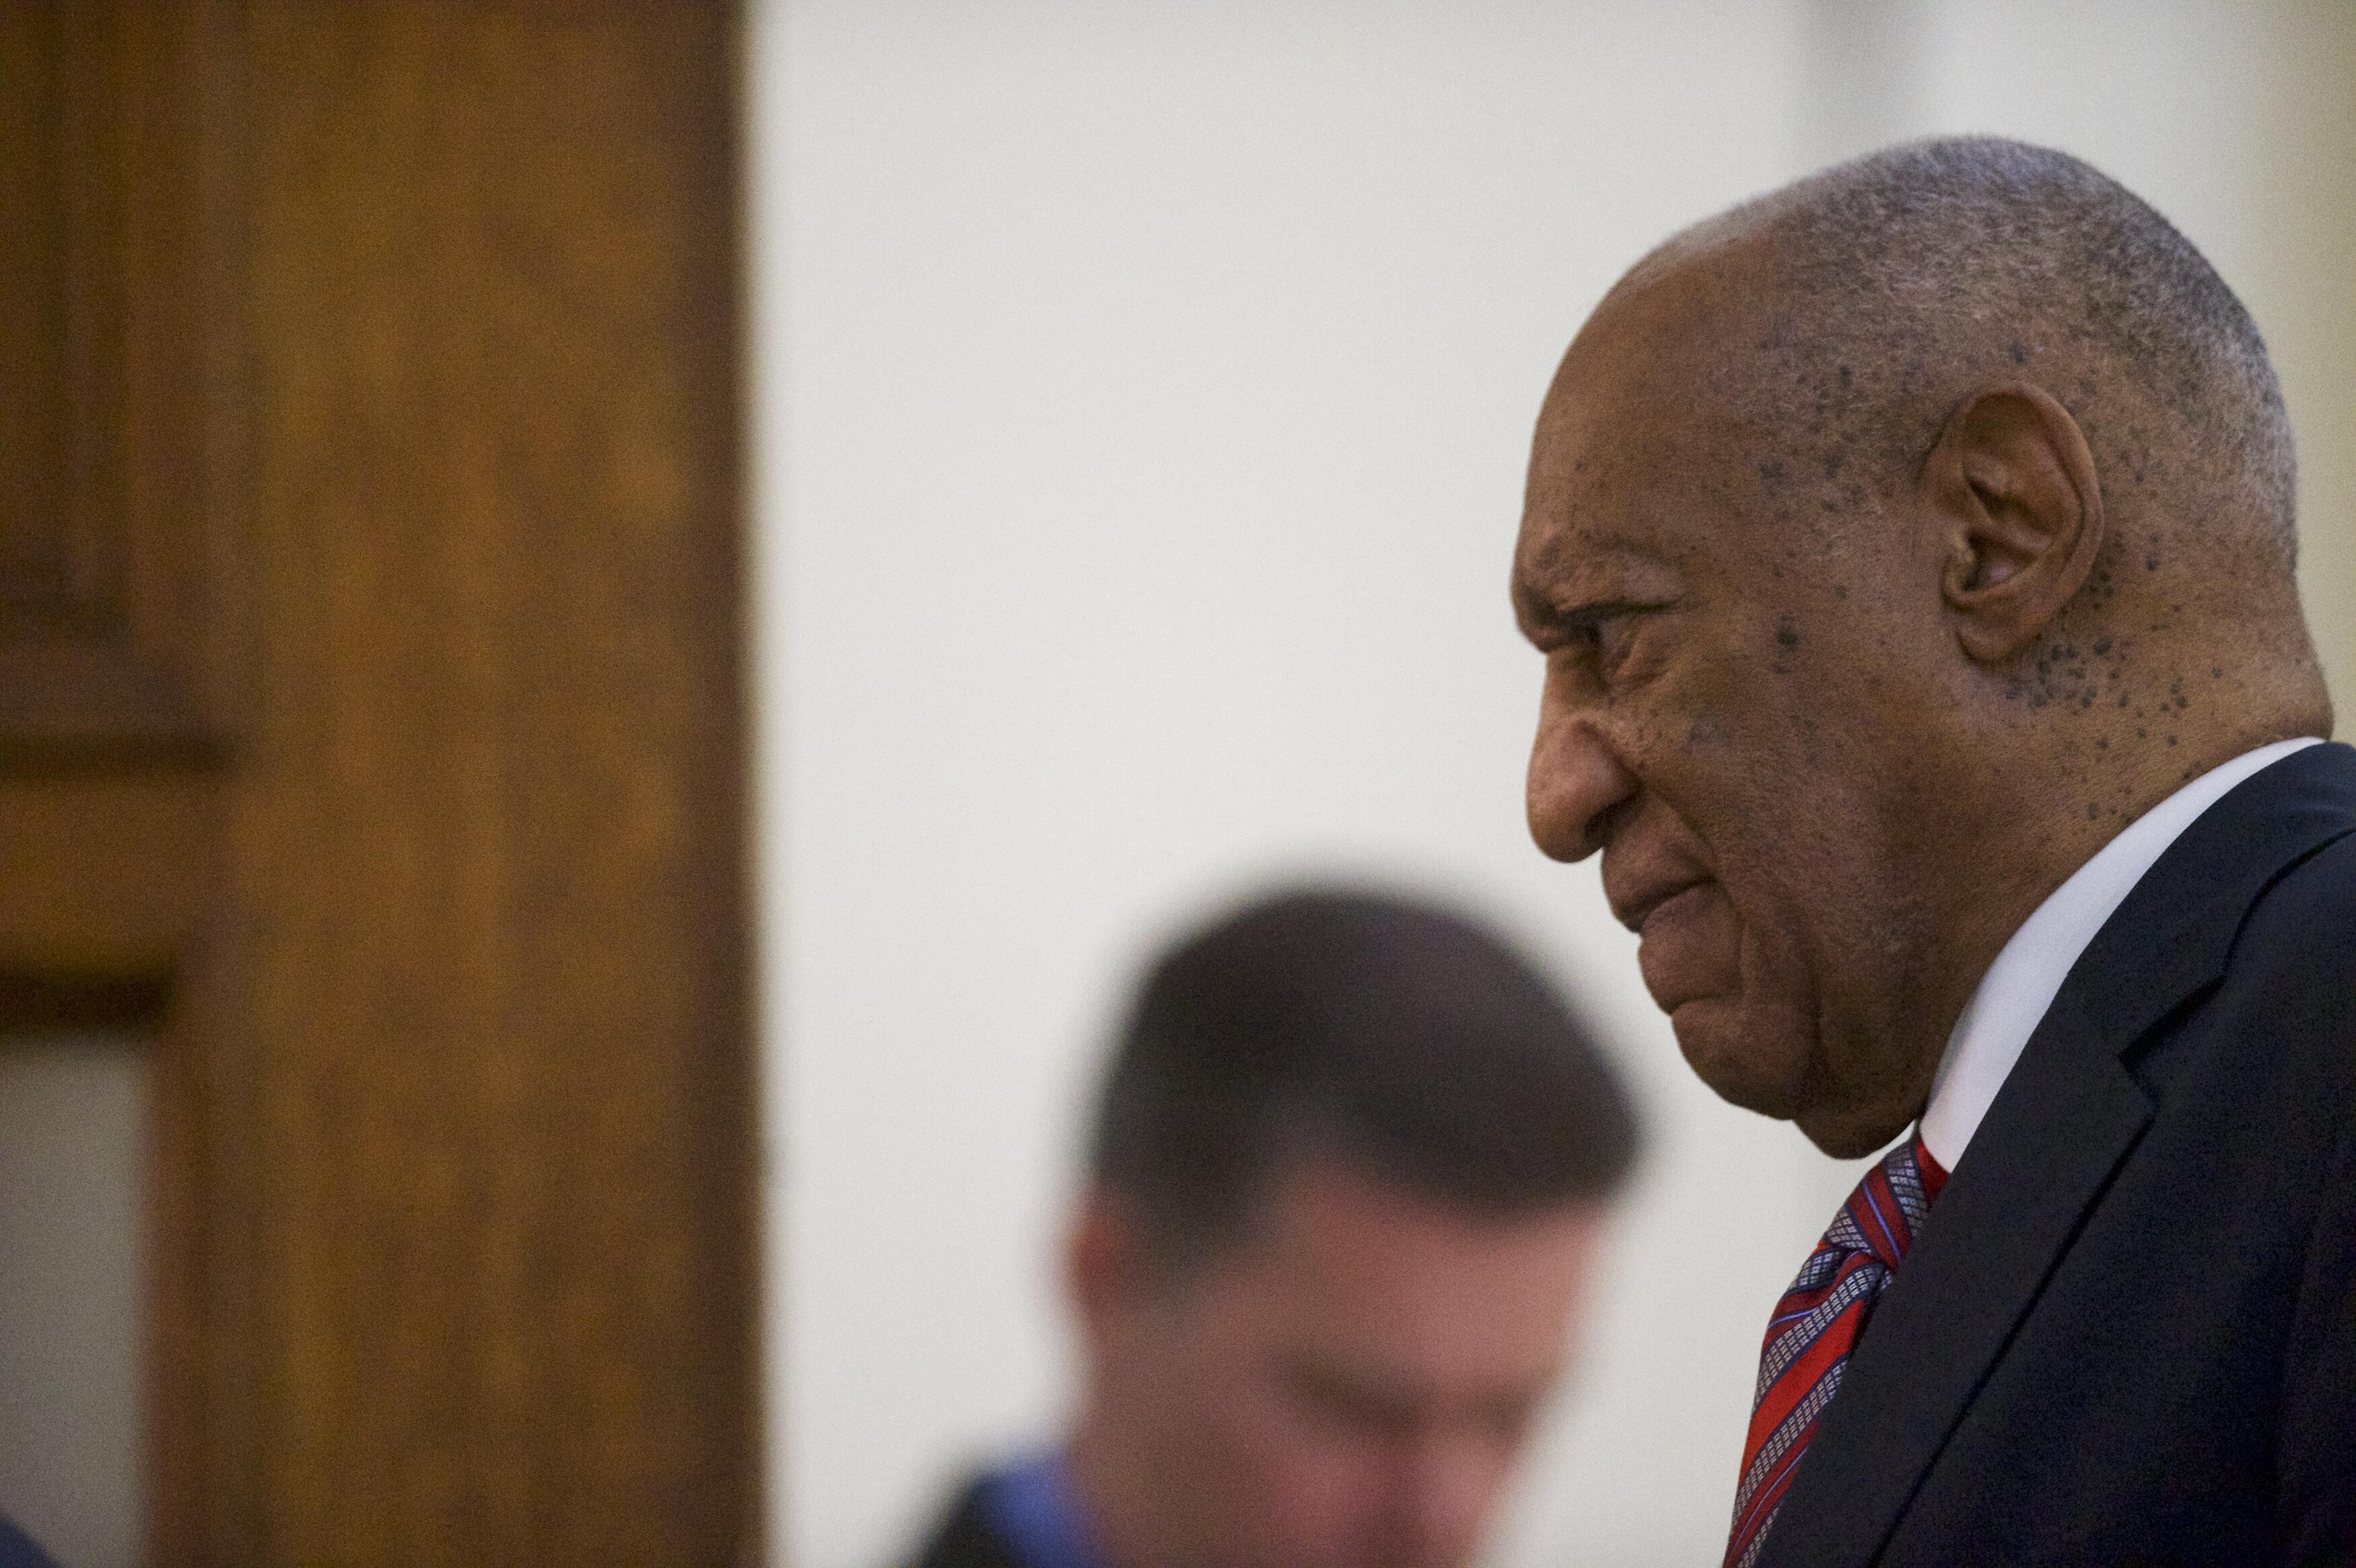 NORRISTOWN, PA - JUNE 7:  Bill Cosby walks outside the courtroom on the third day of his sexual assault trial in the Montgomery County Courthouse June 7, 2017 in Norristown, Pennsylvania.  A former Temple University employee alleges that the entertainer d